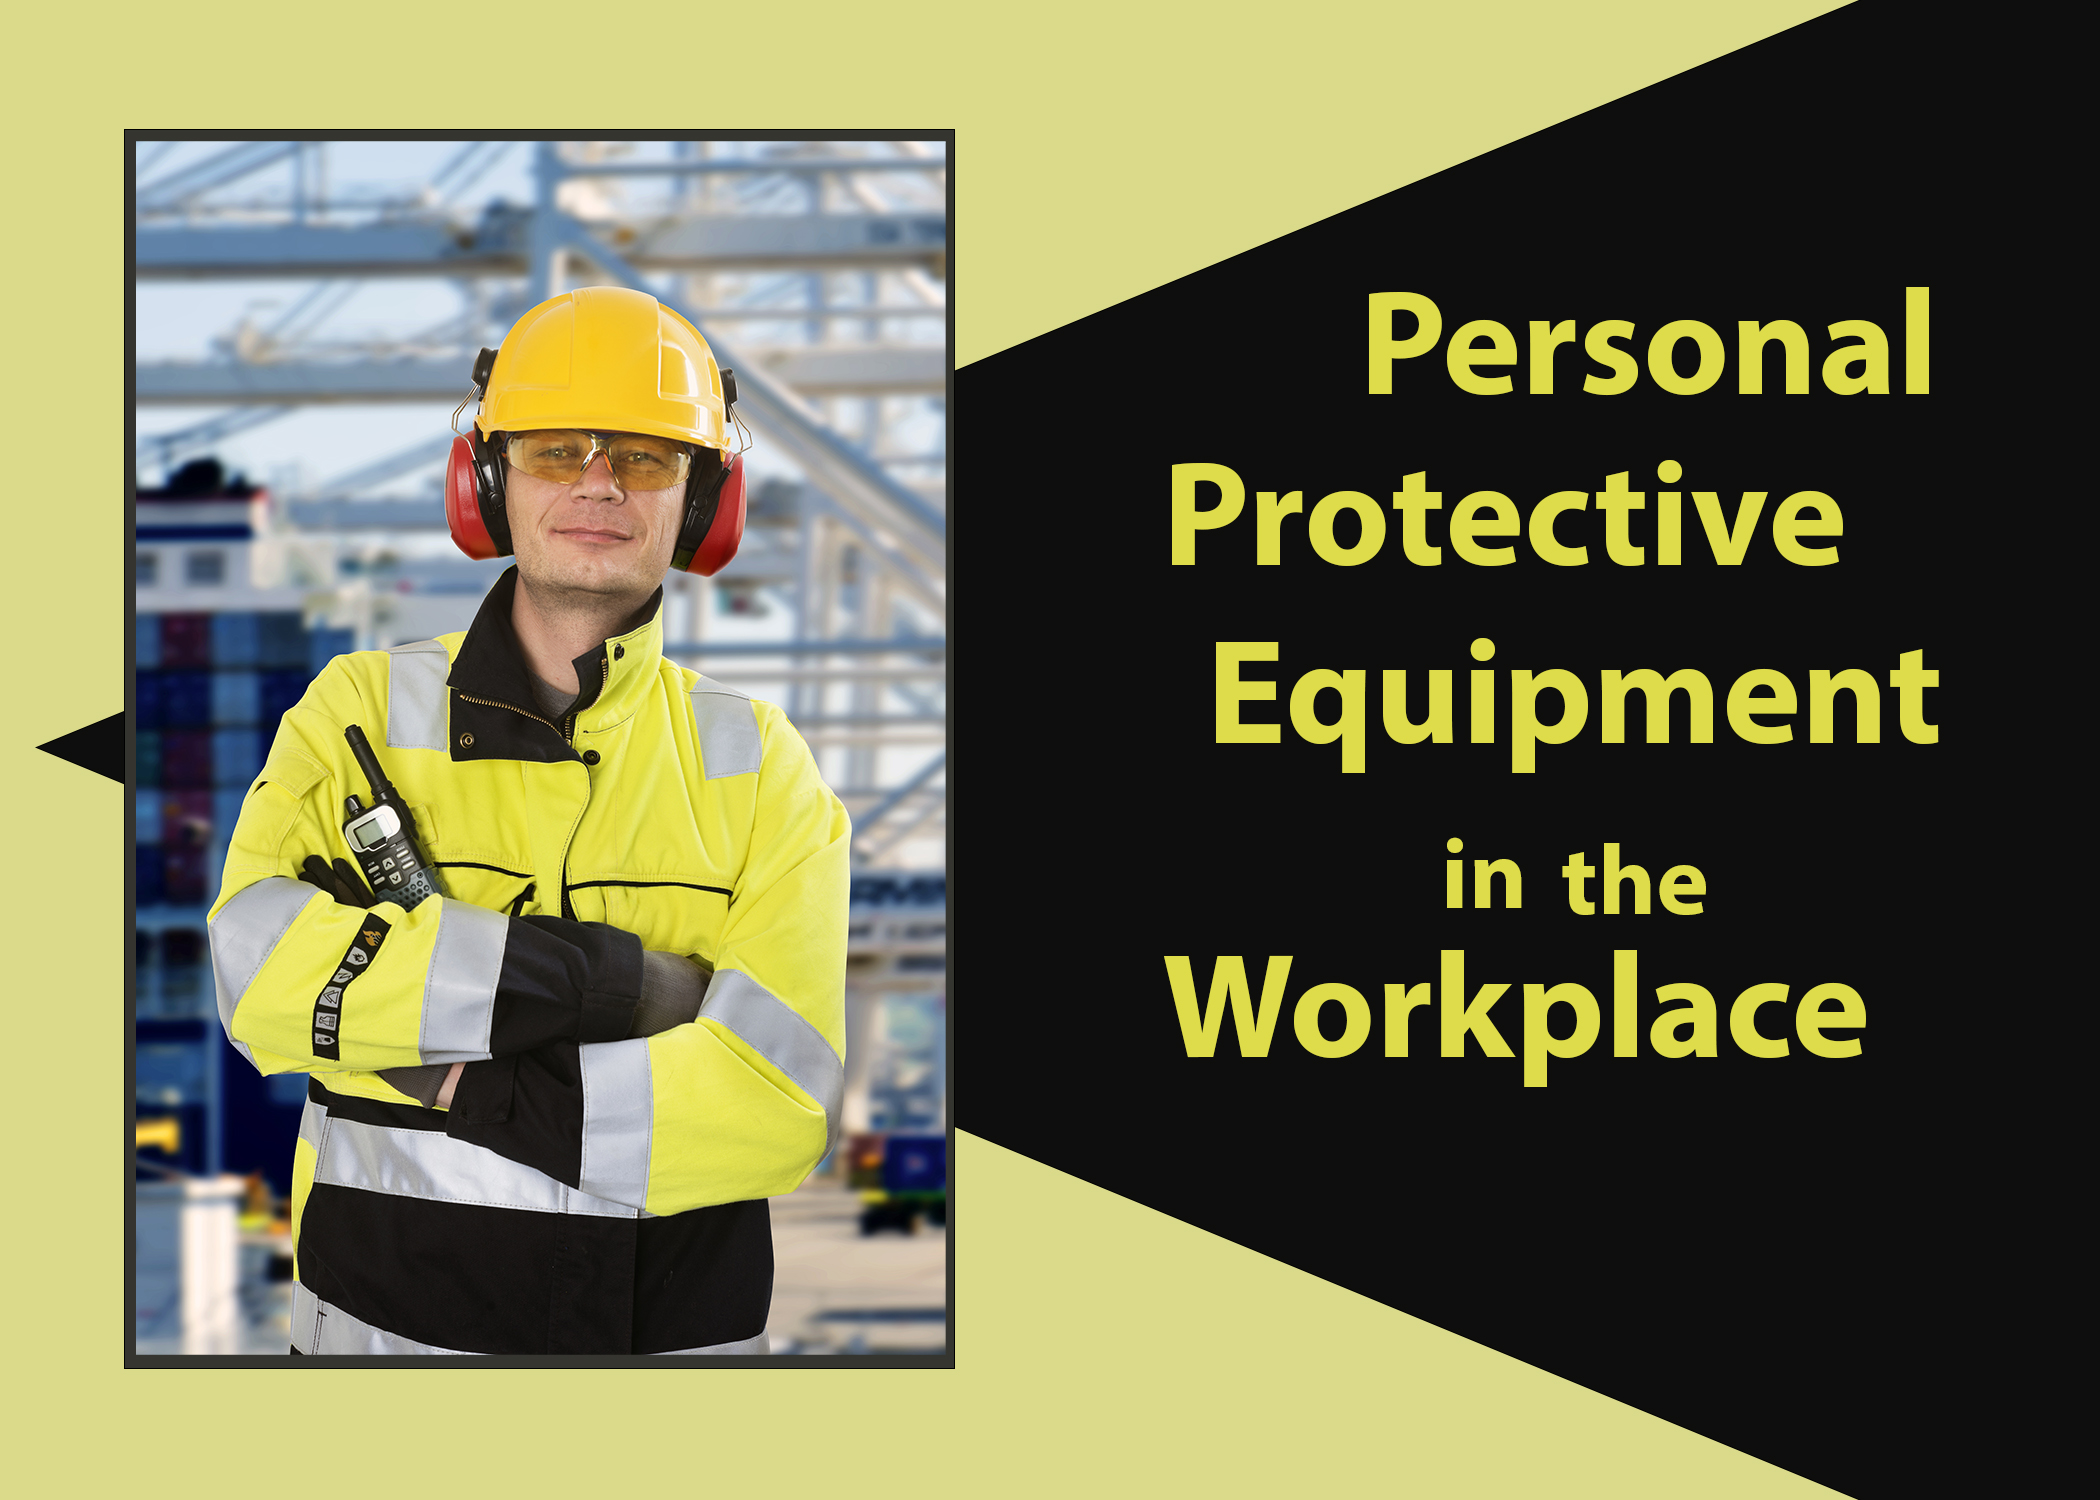 Personal Protective Equipment: Importance and Benefits - Premier